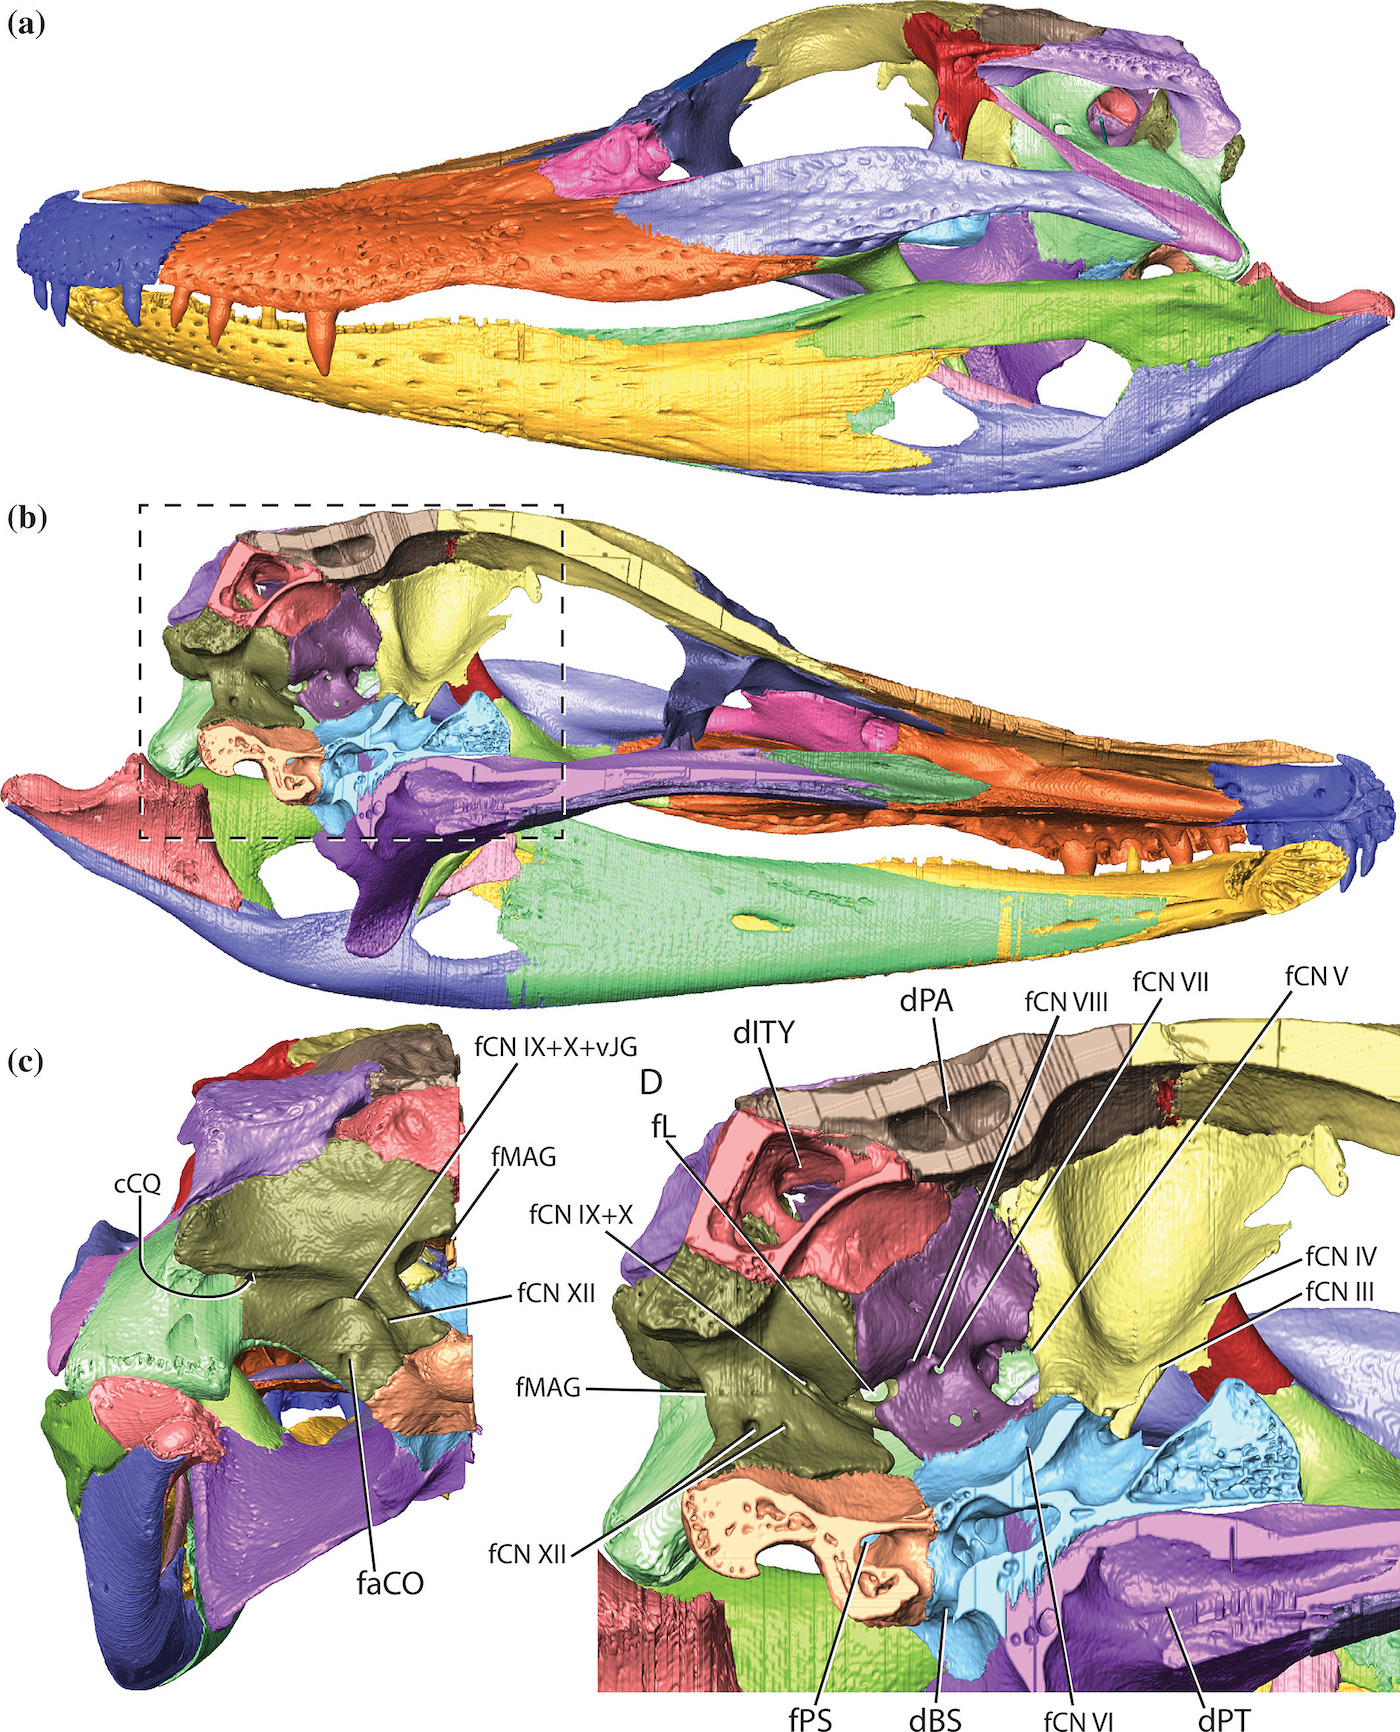 3D reconstruction of alligator cranial elements in left lateral (a), left medial (b), bisected caudal (c) and left medial (d) view from a The Anatomical Record paper titled "A 3D ontogenetic atlas of Alligator mississippiensis cranial nerves and their significance for comparative neurology of reptiles."